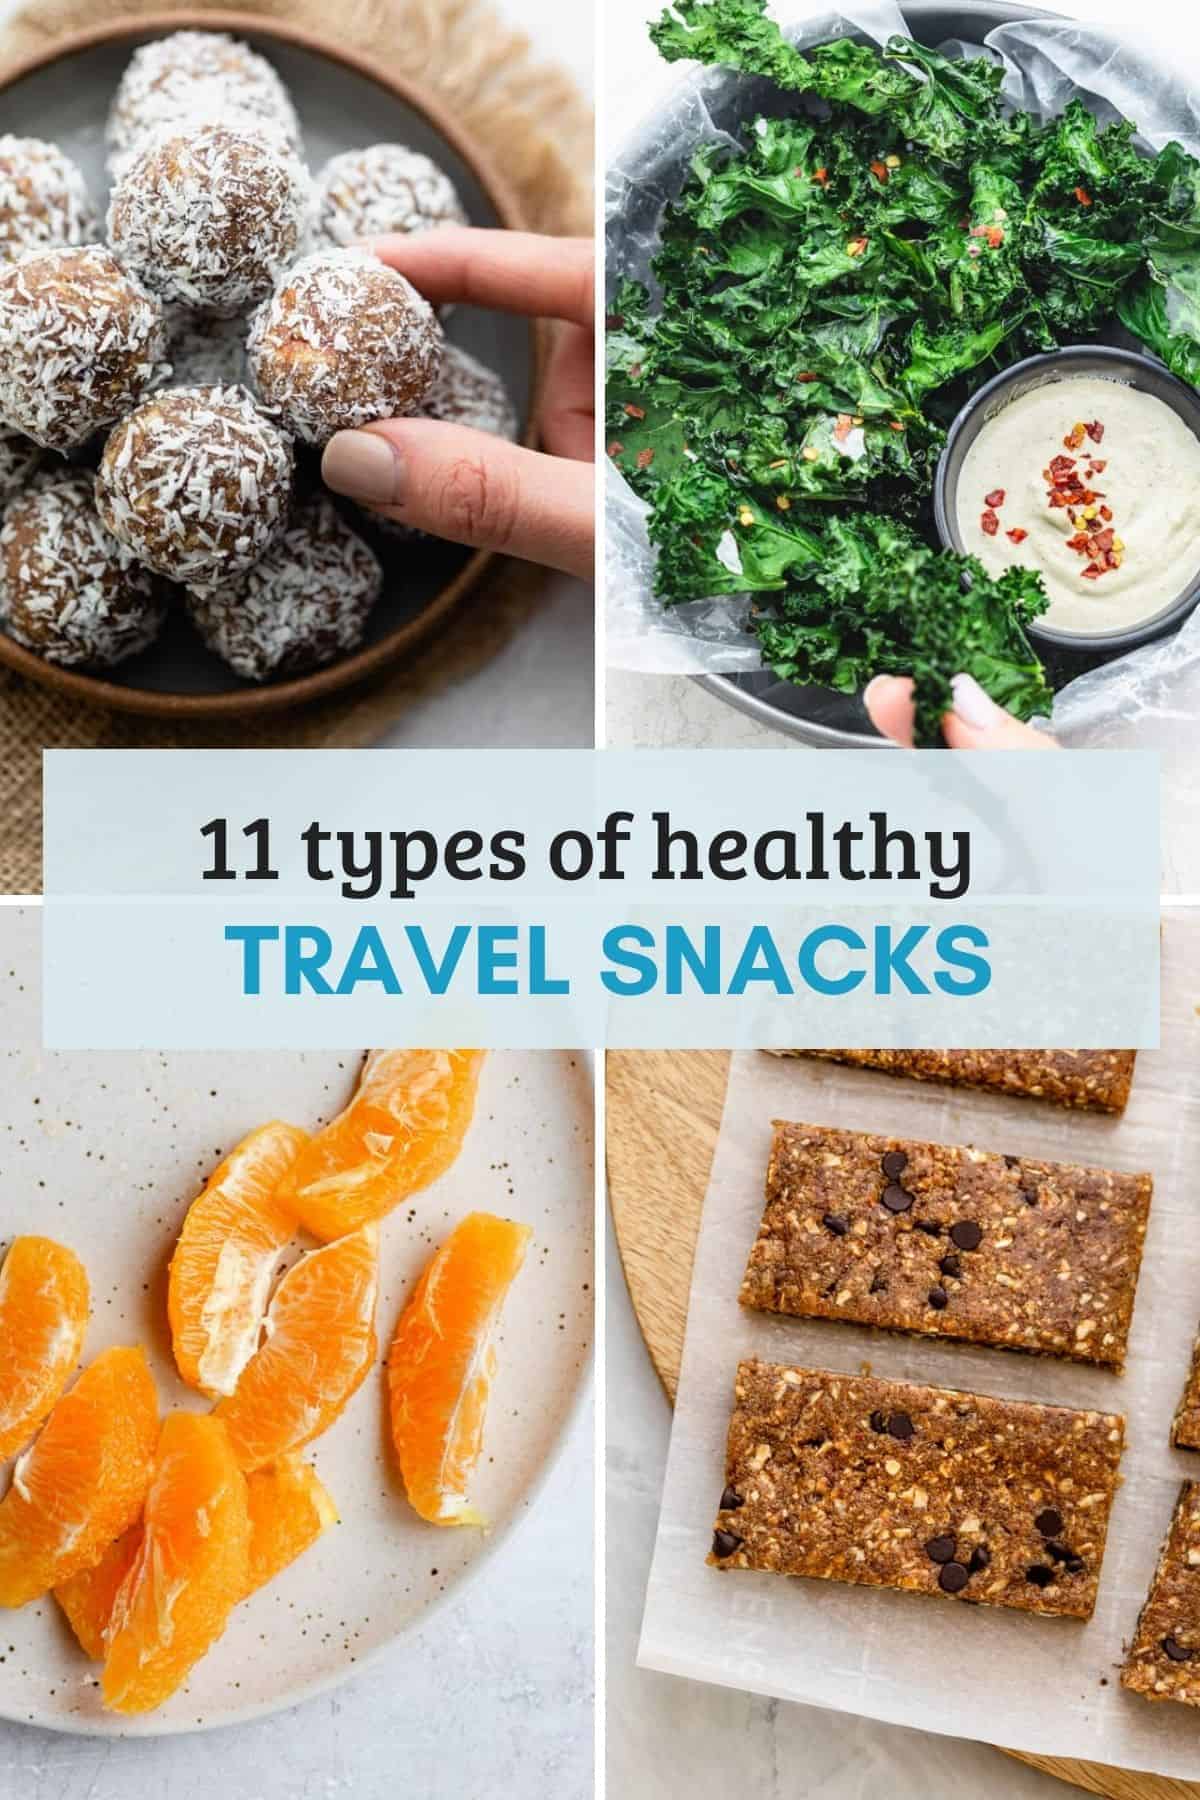 11 Types of Healthy Travel Snacks